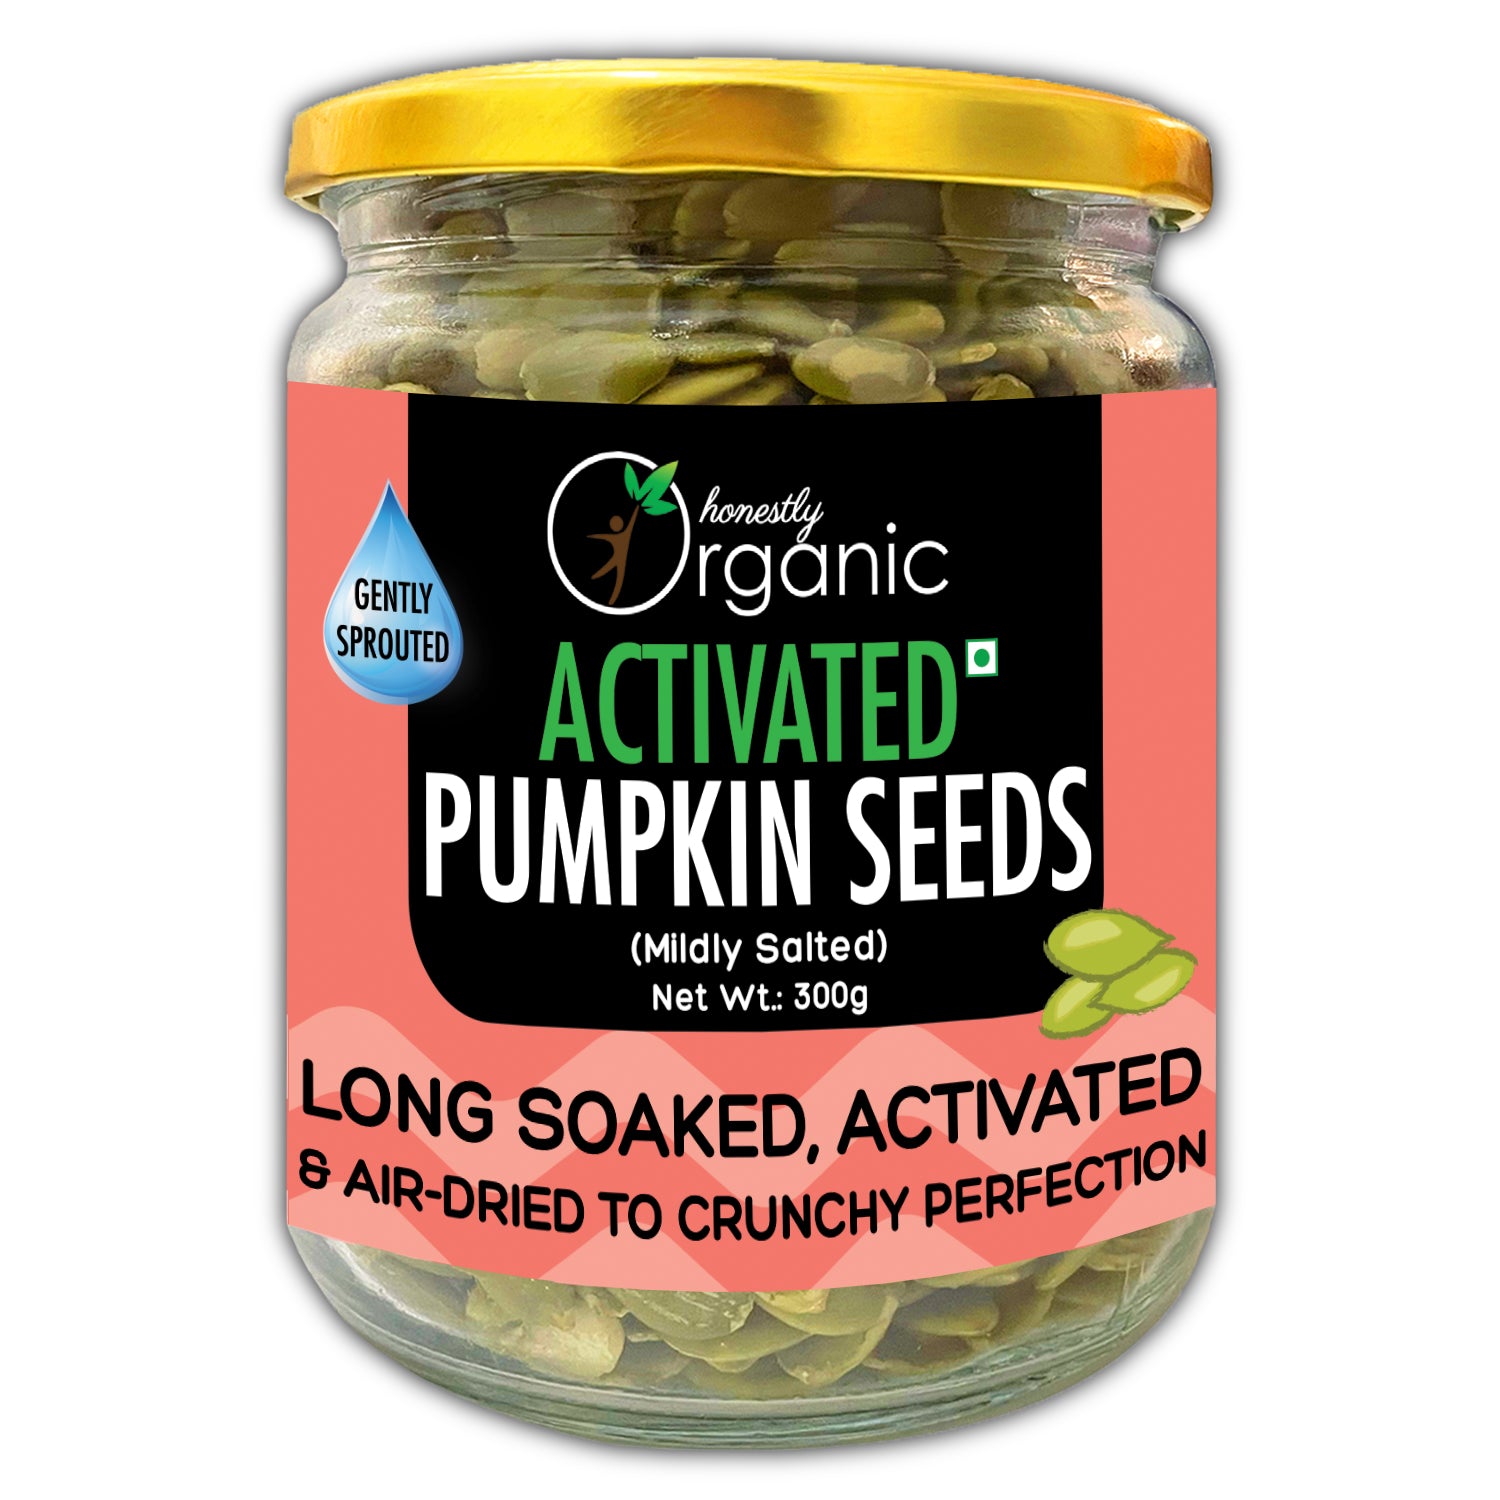 D-Alive Organic Pumpkin Seeds | Activated/Sprouted | Mildly Salted (Long Soaked & Air Dried)